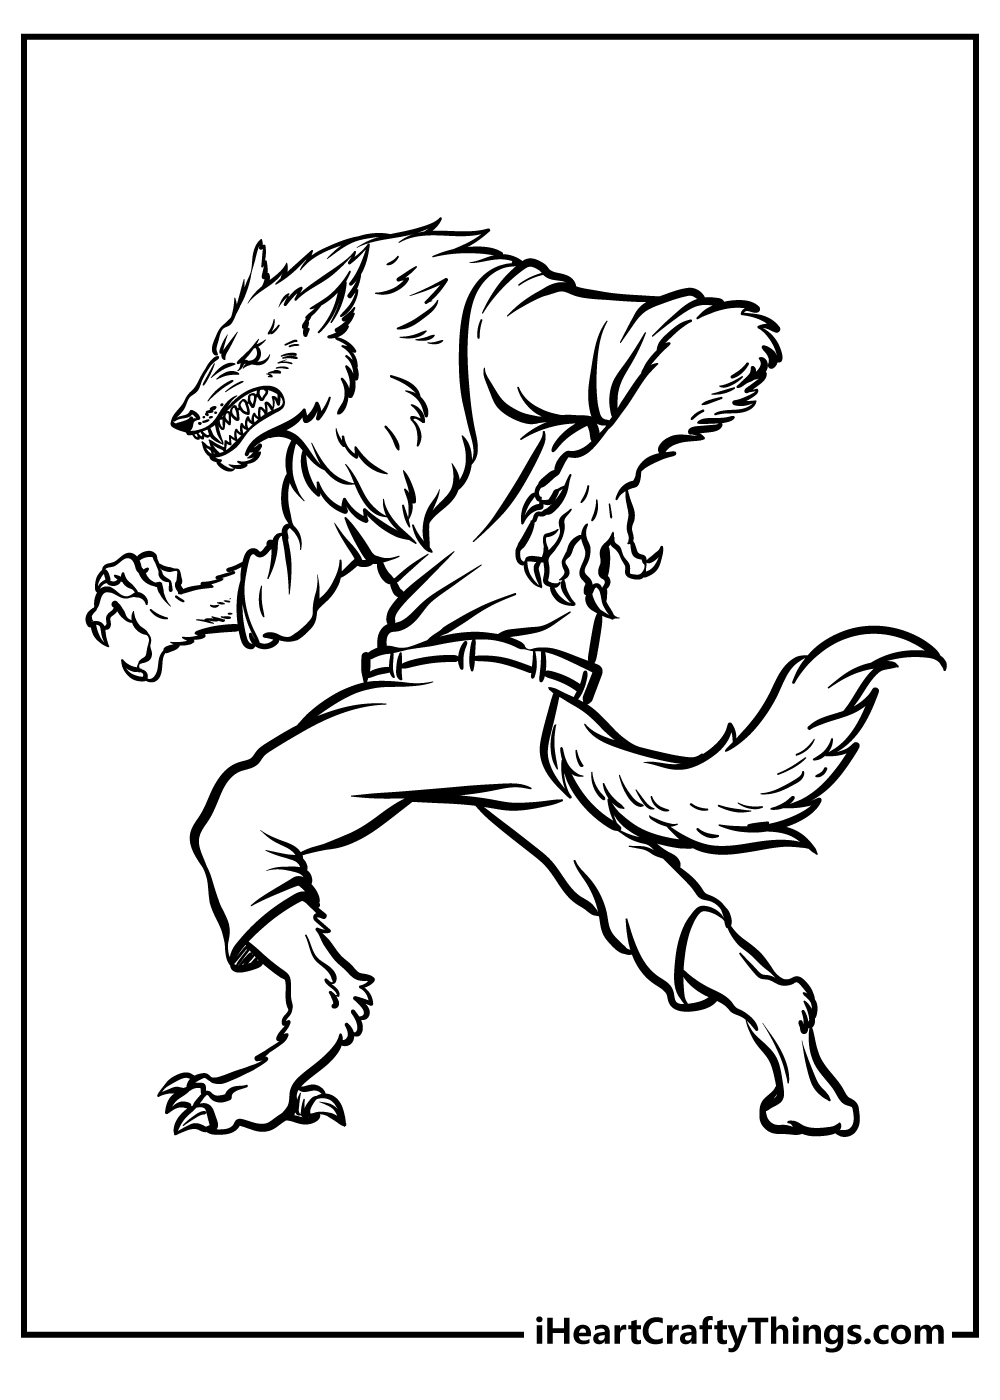 Werewolf Coloring Pages free pdf download